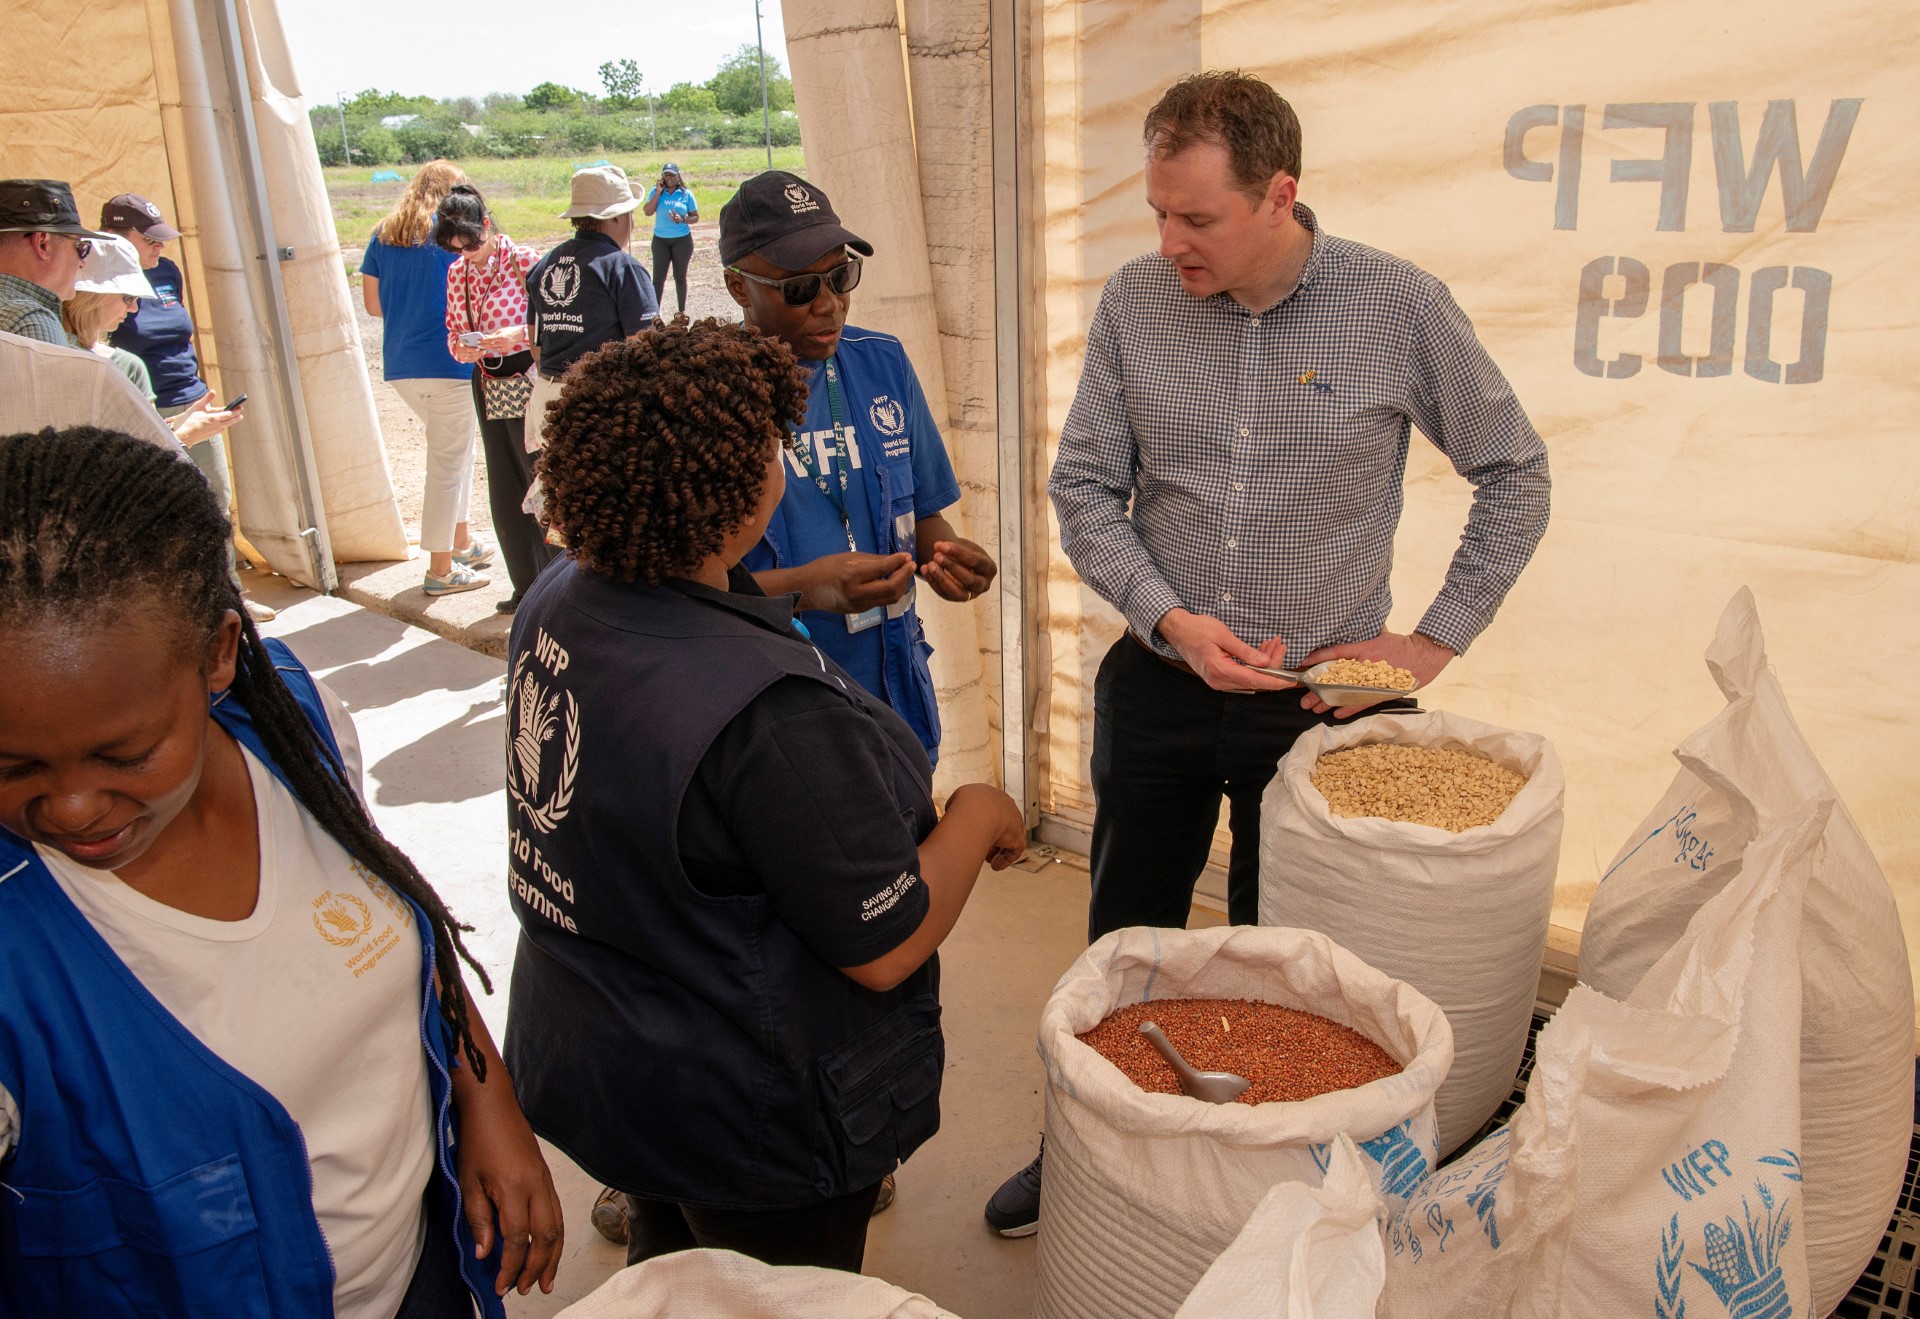 Agriculture Minister Charlie McConalogue visits the food aid distribution operations of the UN Refugee Camp in Kakuma, north west Kenya